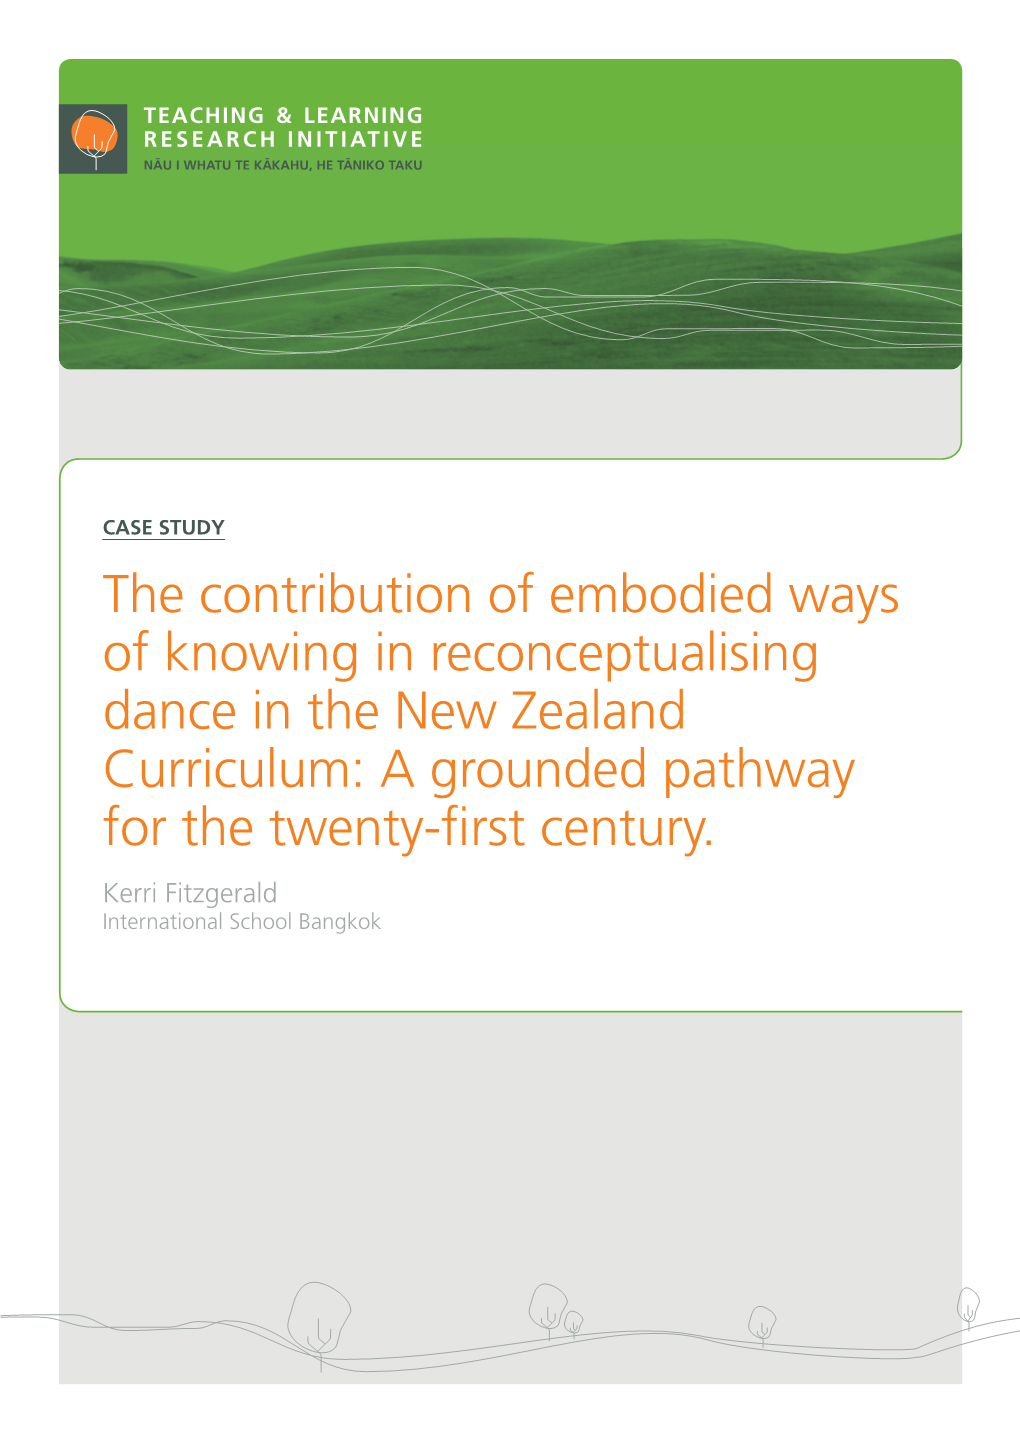 The Contribution of Embodied Ways of Knowing in Reconceptualising Dance in the New Zealand Curriculum: a Grounded Pathway for the Twenty-First Century